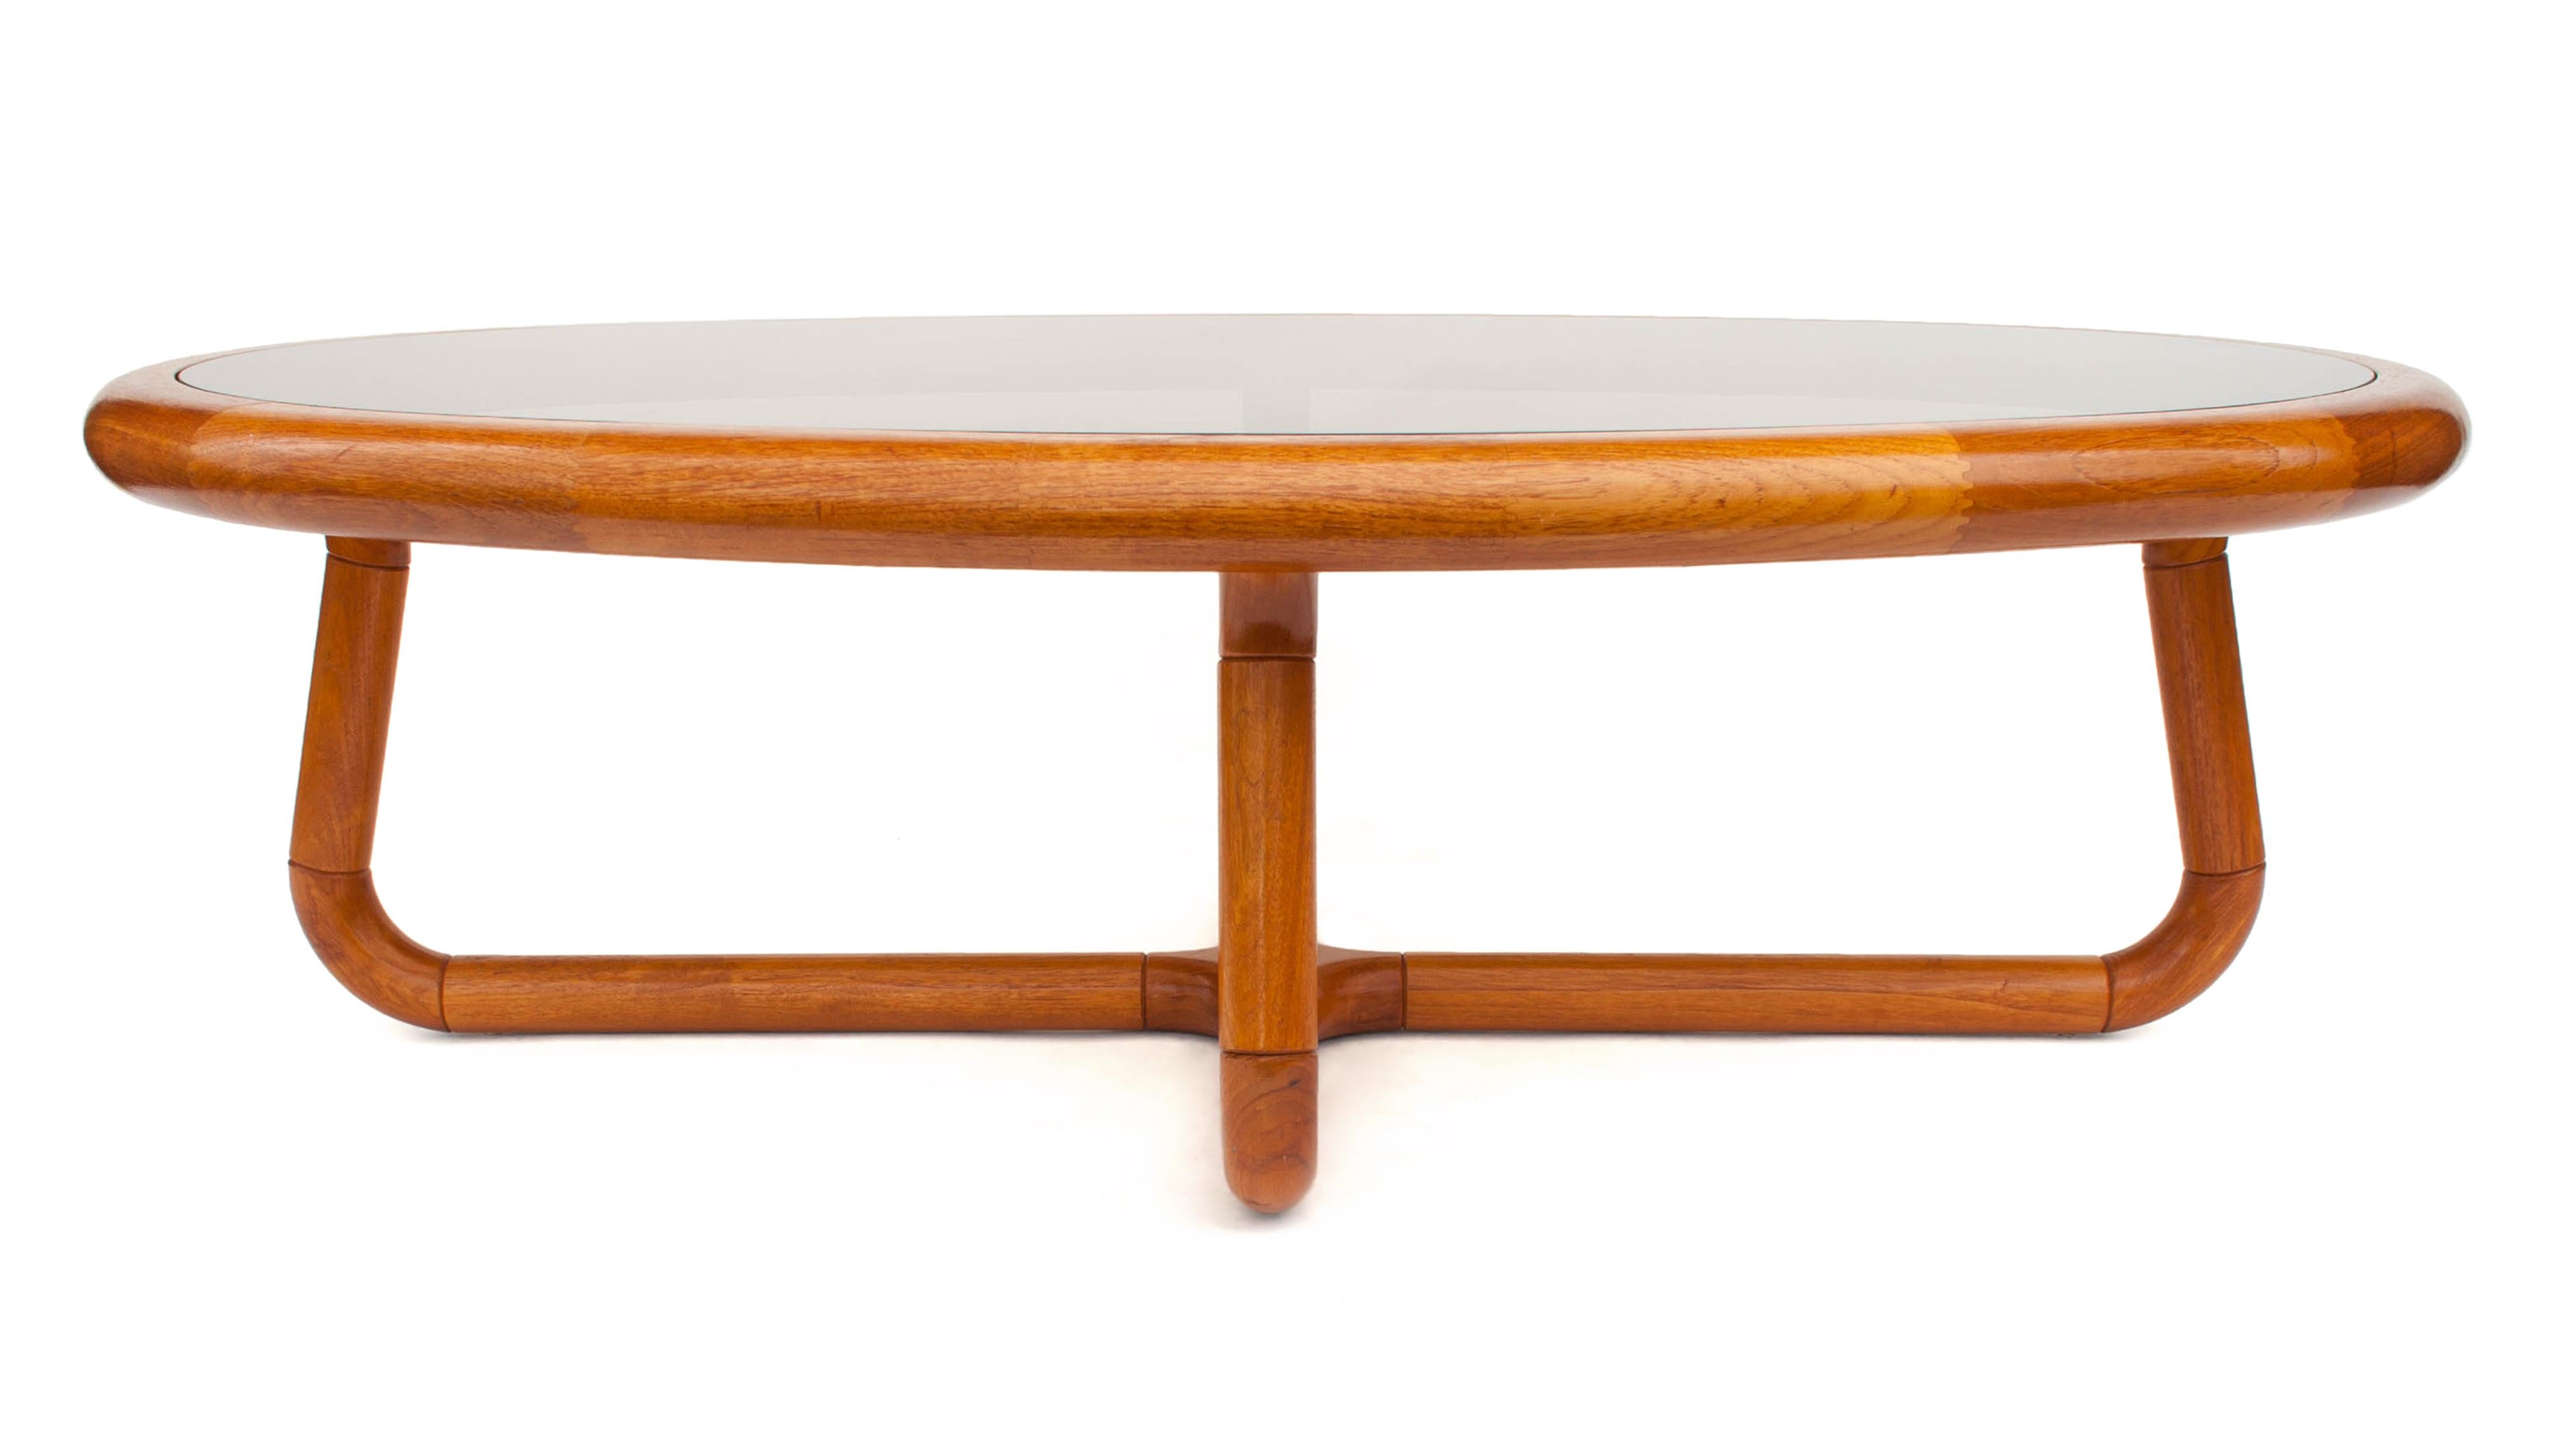 Uncommon midcentury sculptural teak coffee table with smoked glass by Uldum Mobelfabrik. This elegant Danish table is oval in shape and made from curved teak sections. Original label on bottom.
     